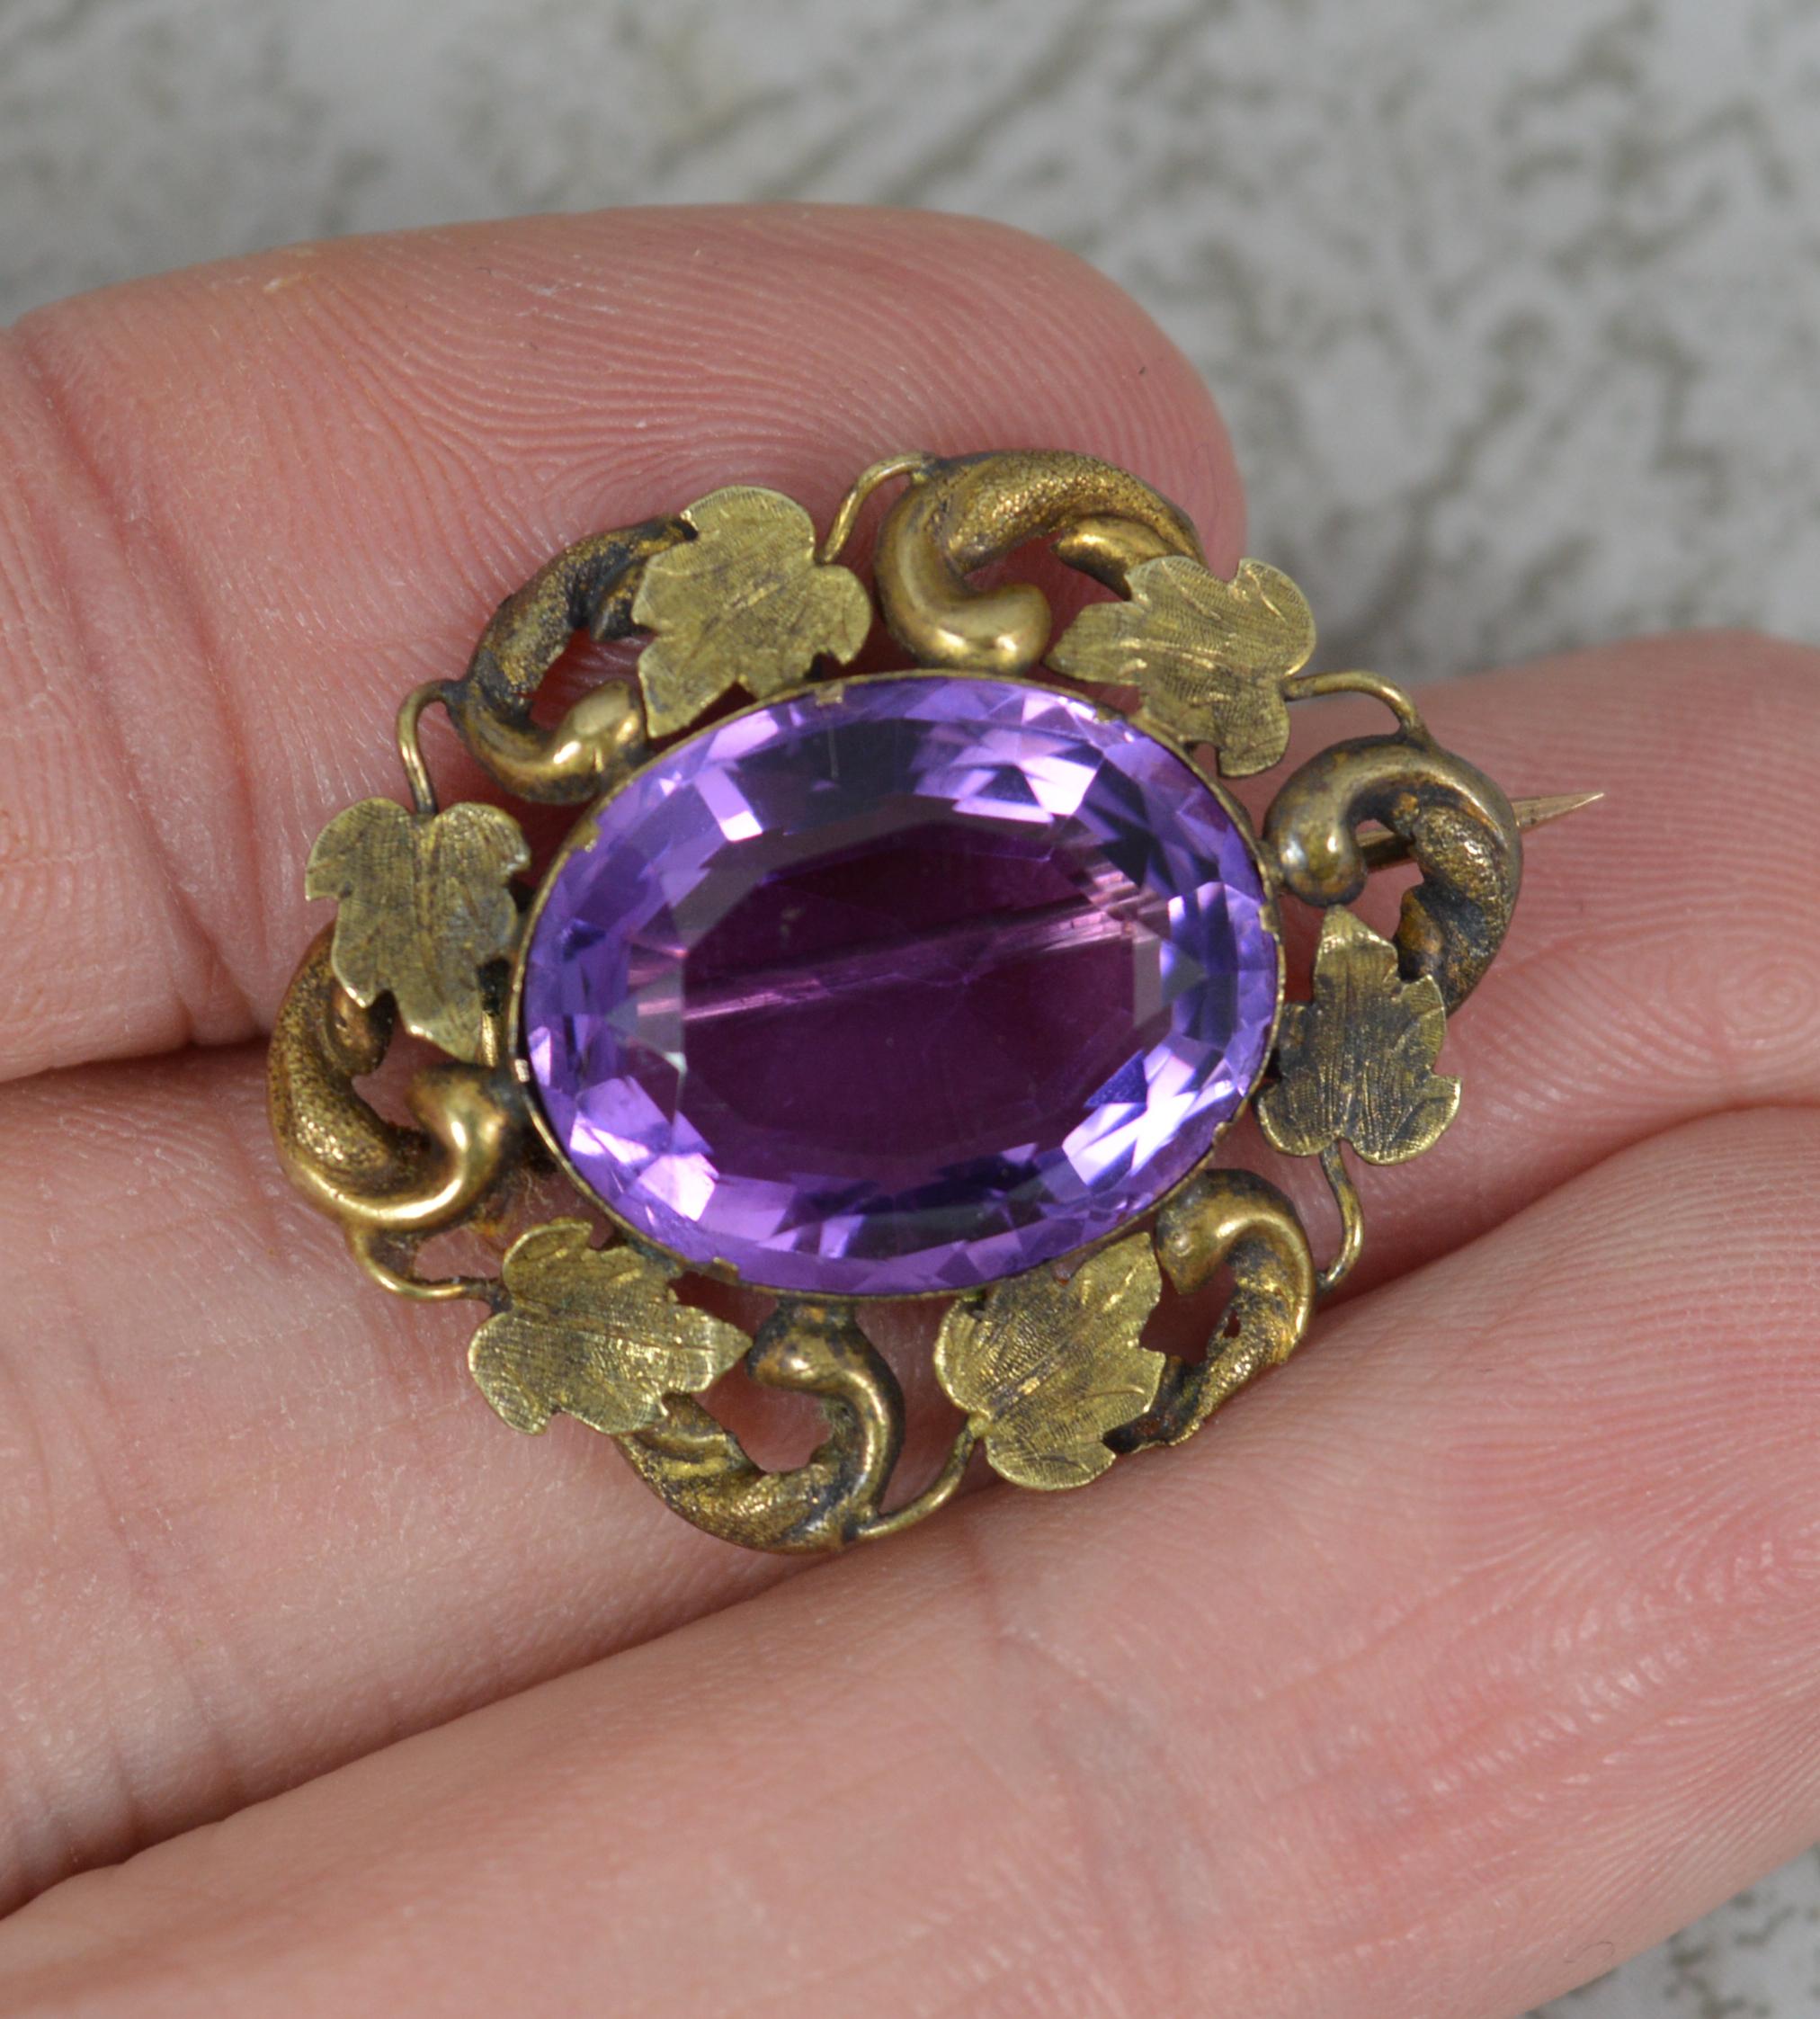 A mid Victorian period brooch.
Solid 9 carat gold example. A fine floral shape.
Set with an oval cut amethyst to centre, 12mm x 15mm. 

CONDITION ; Good for age. Well set, clean amethyst. Clean gold, some general wear. Uncleaned. Please view